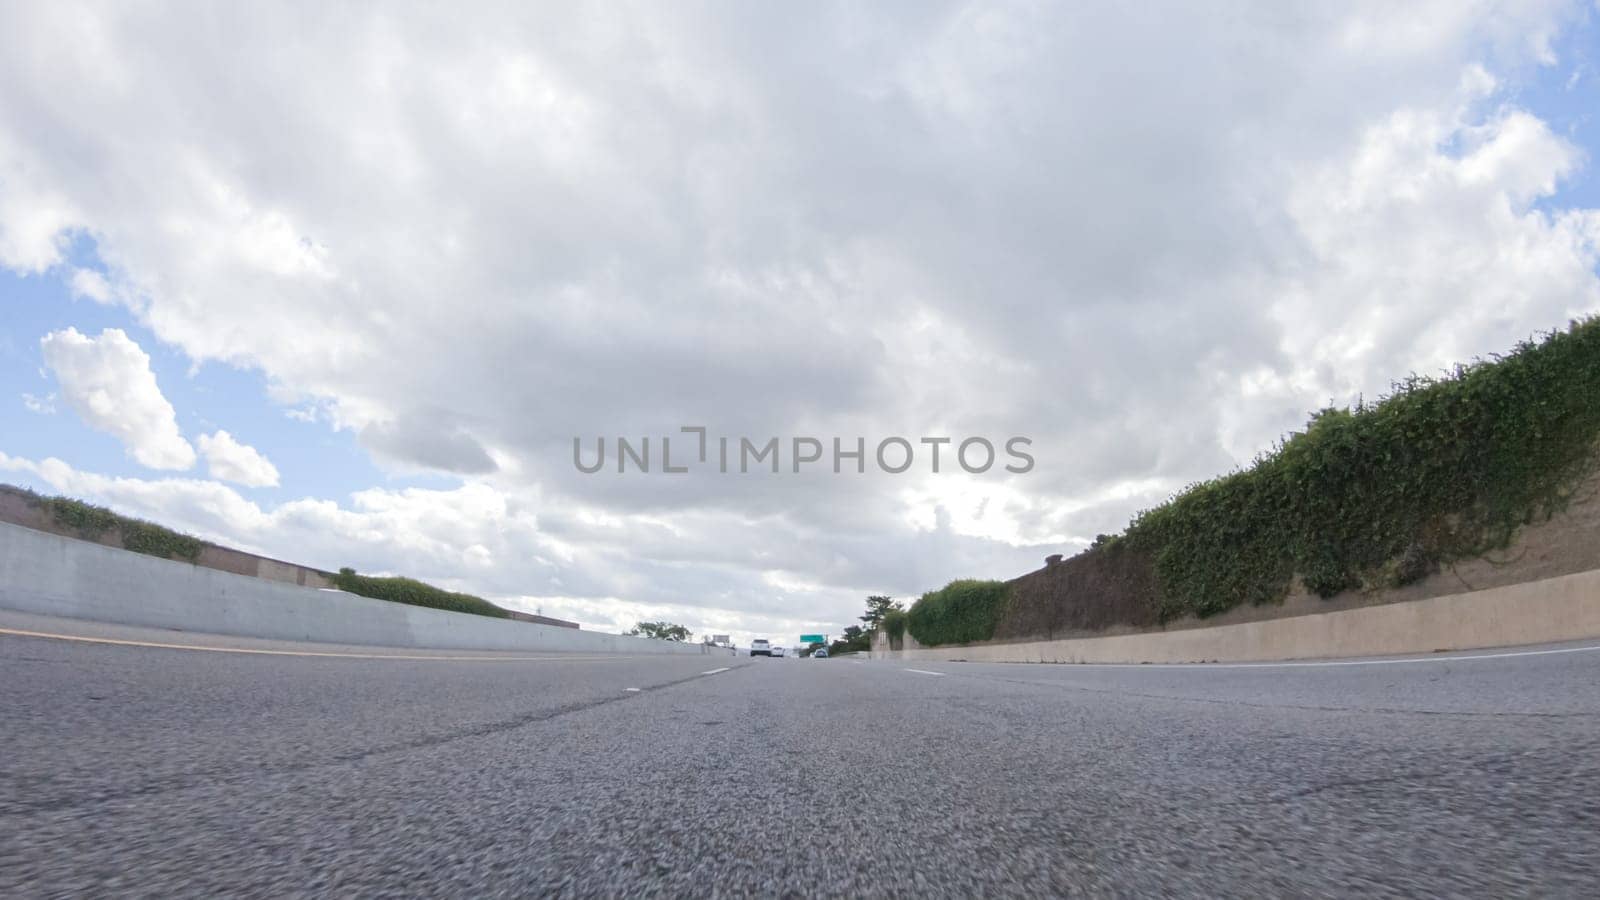 On a cloudy winter day, a car smoothly travels along Highway 101 near Santa Maria, California, under a cloudy sky, surrounded by a blend of greenery and golden hues.